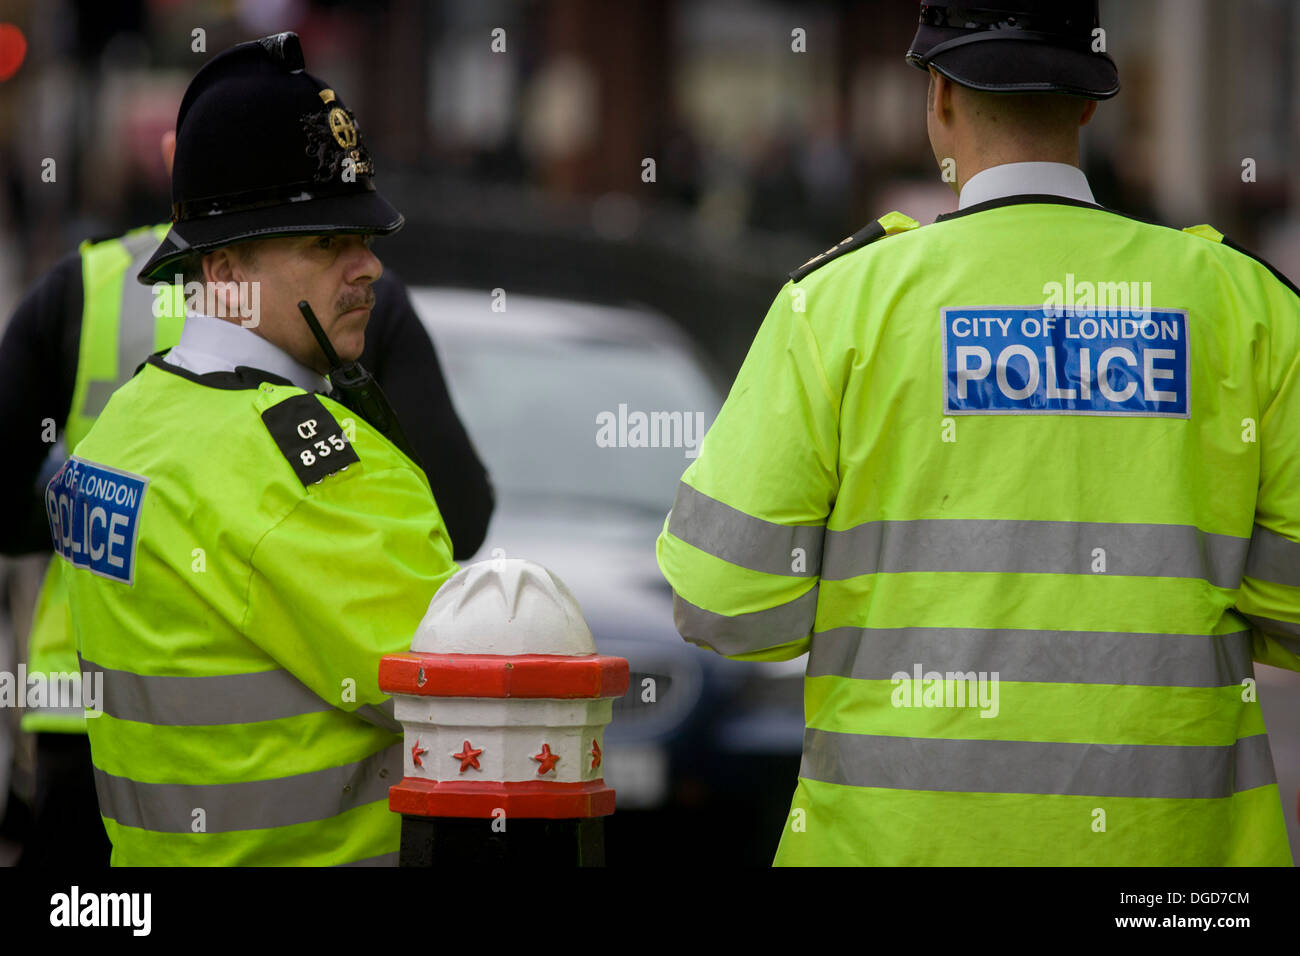 Officers from the City of London police, man a checkpoint looking for suspect vehicles and drivers entering at Aldgate. Stock Photo